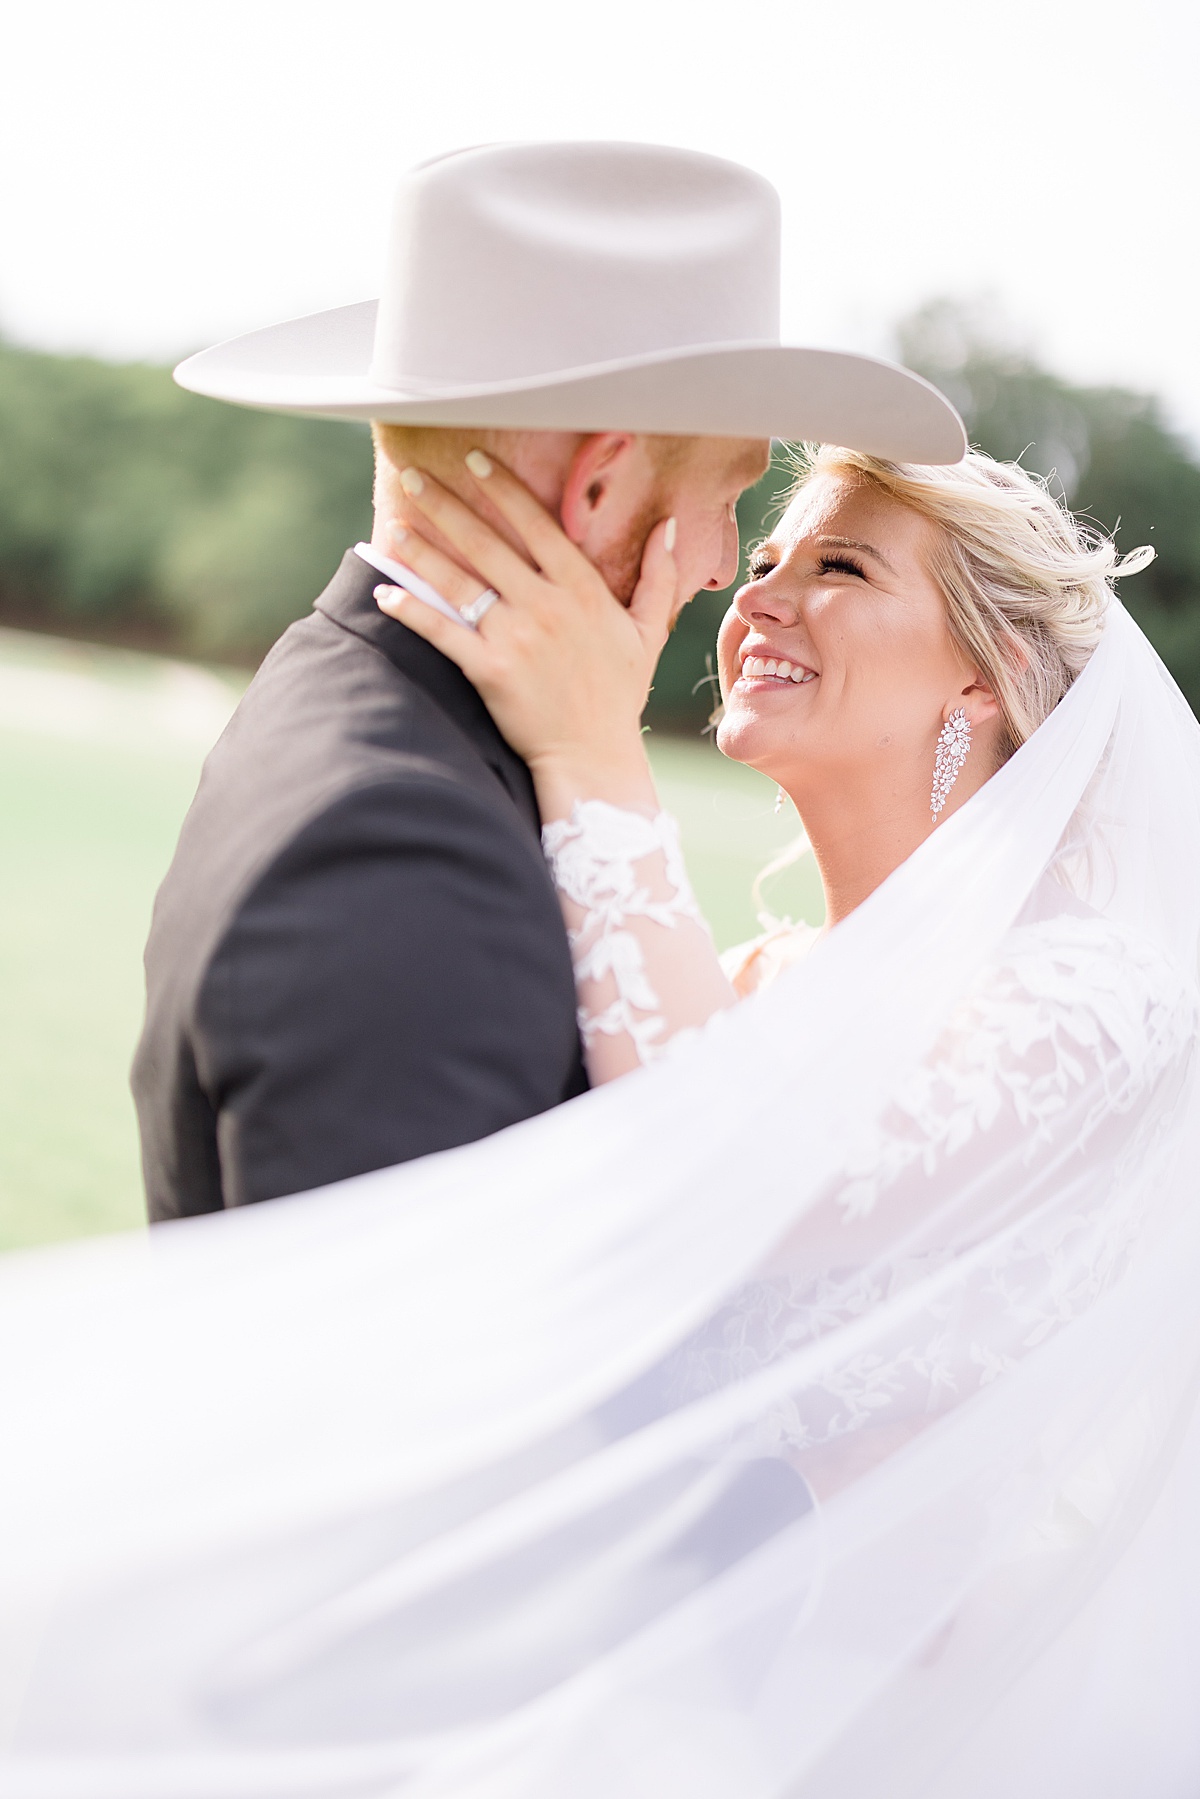 bride with diamond earrings and groom in white felt hat smile during Western themed July wedding